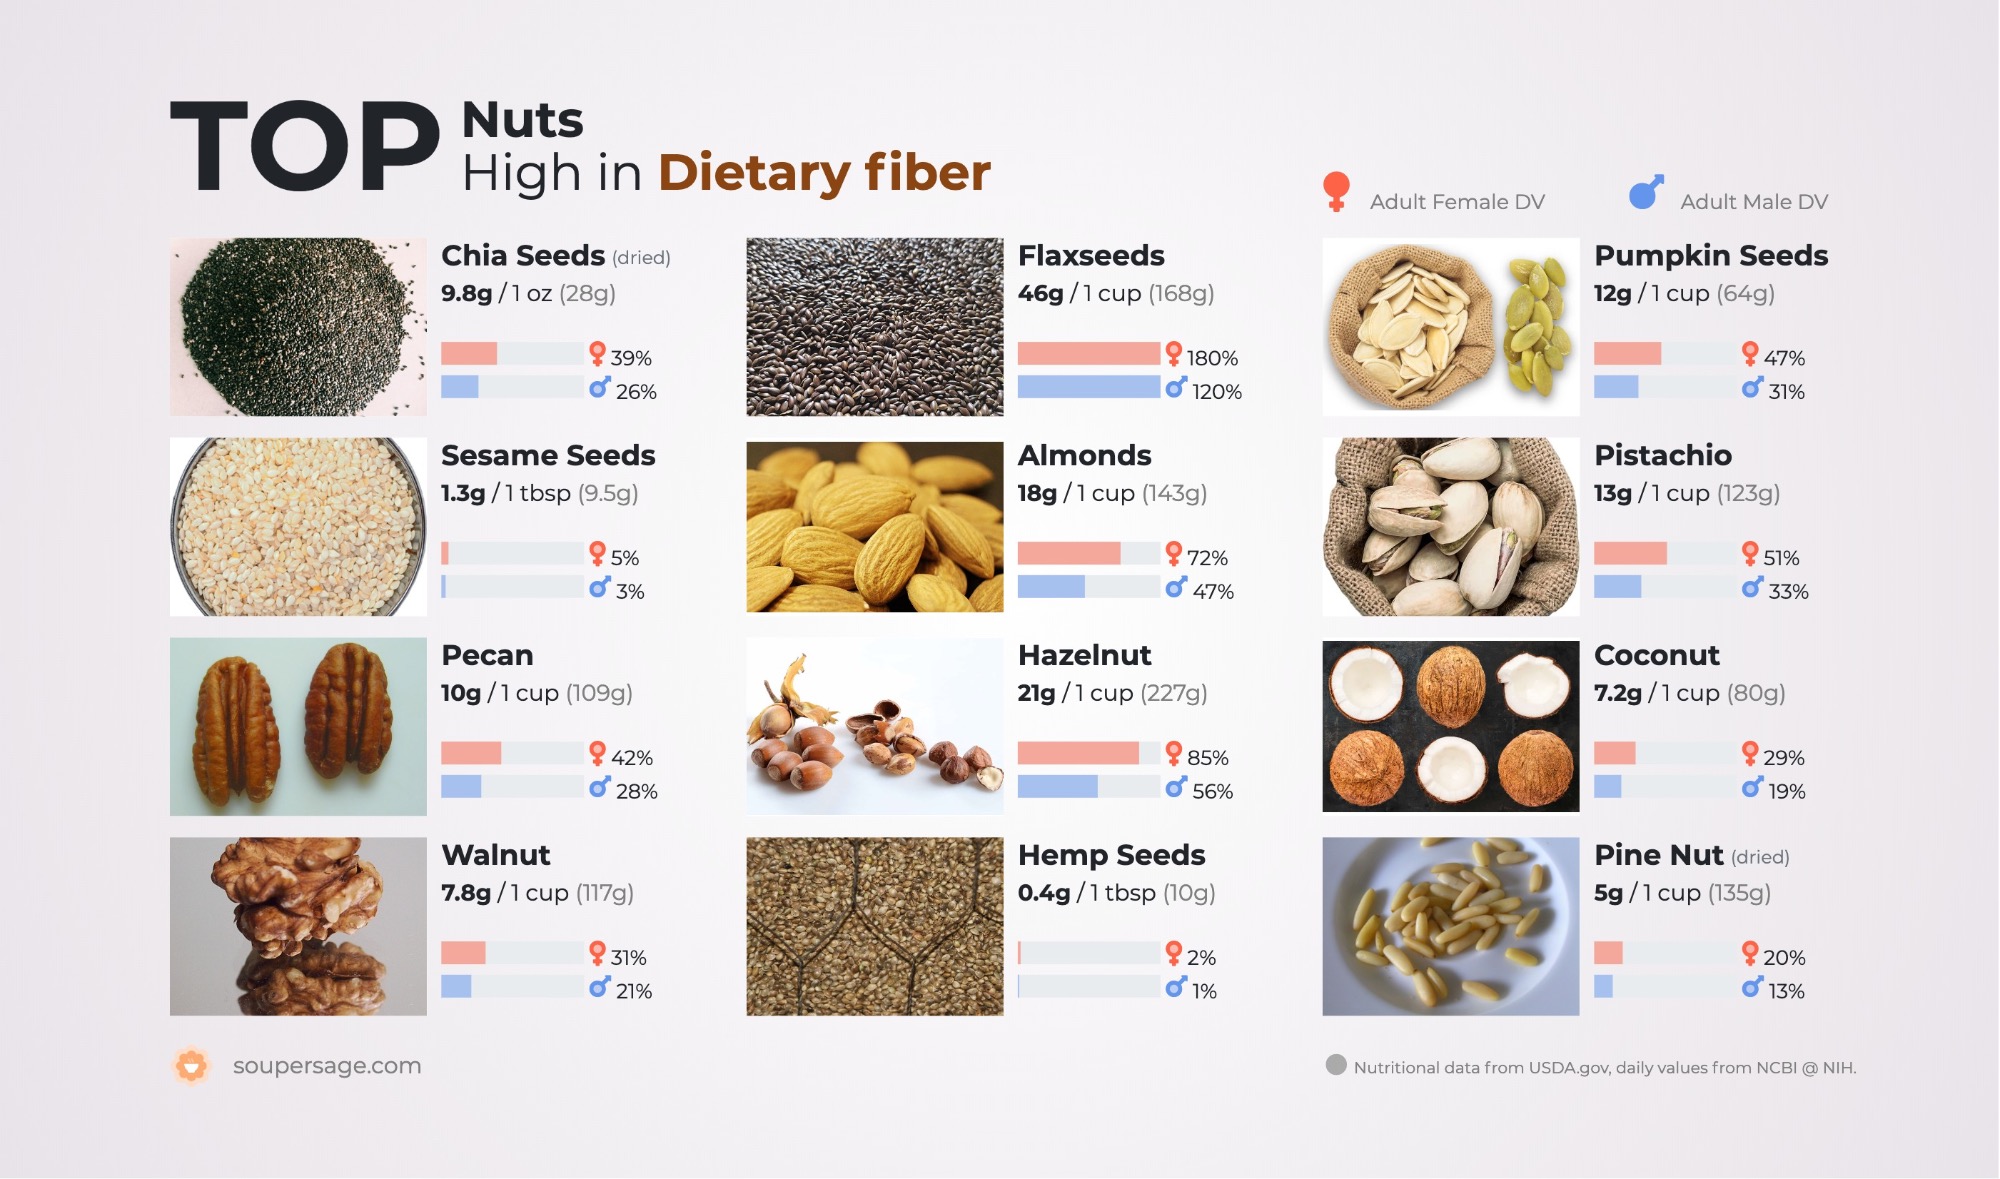 image of Top Nuts High in Dietary fiber